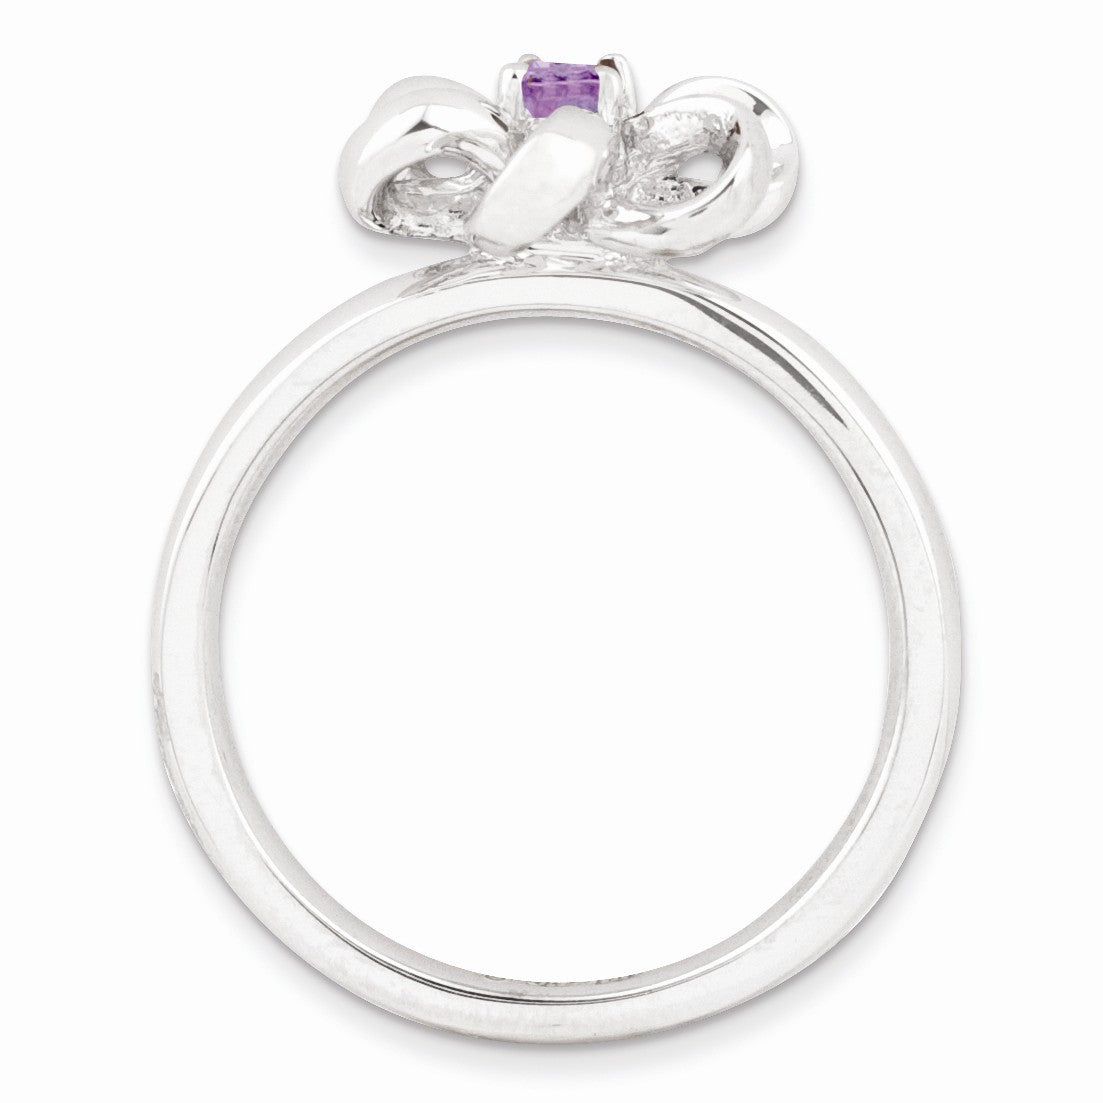 Alternate view of the Sterling Silver Stackable Amethyst Flower Ring by The Black Bow Jewelry Co.